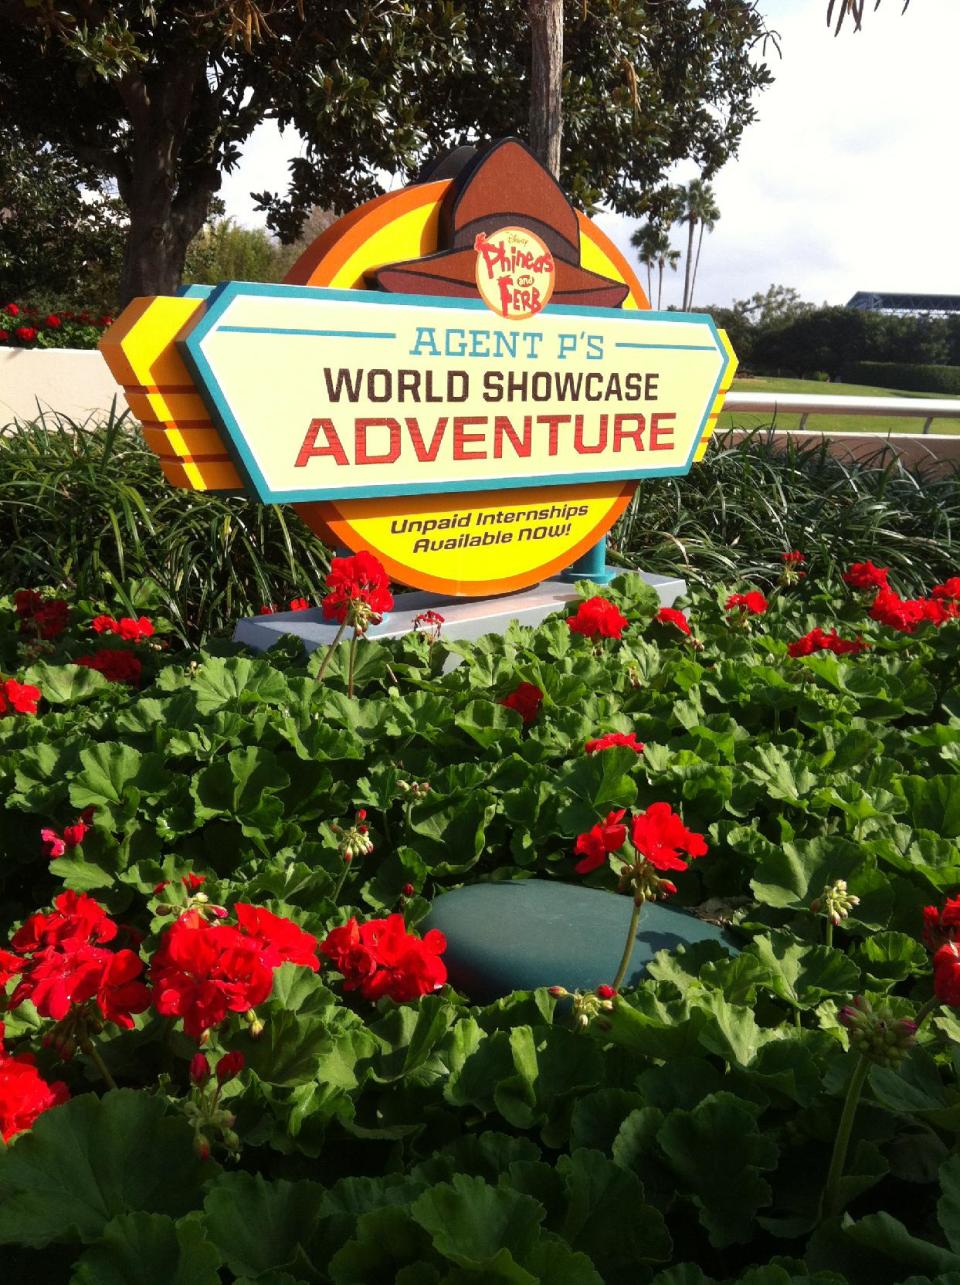 In this Feb. 13, 2013 photo, a sign encouraging Walt Disney World guests to participate in the "Agent P's World Showcase Adventure" game is displayed at the Epcot theme park in Lake Buena Vista, Fla. The "Agent P" game and others like it represent a recent push by Disney World to provide its guests with attractions that allow them to interact with their favorite characters. (AP Photo/Mike Householder)